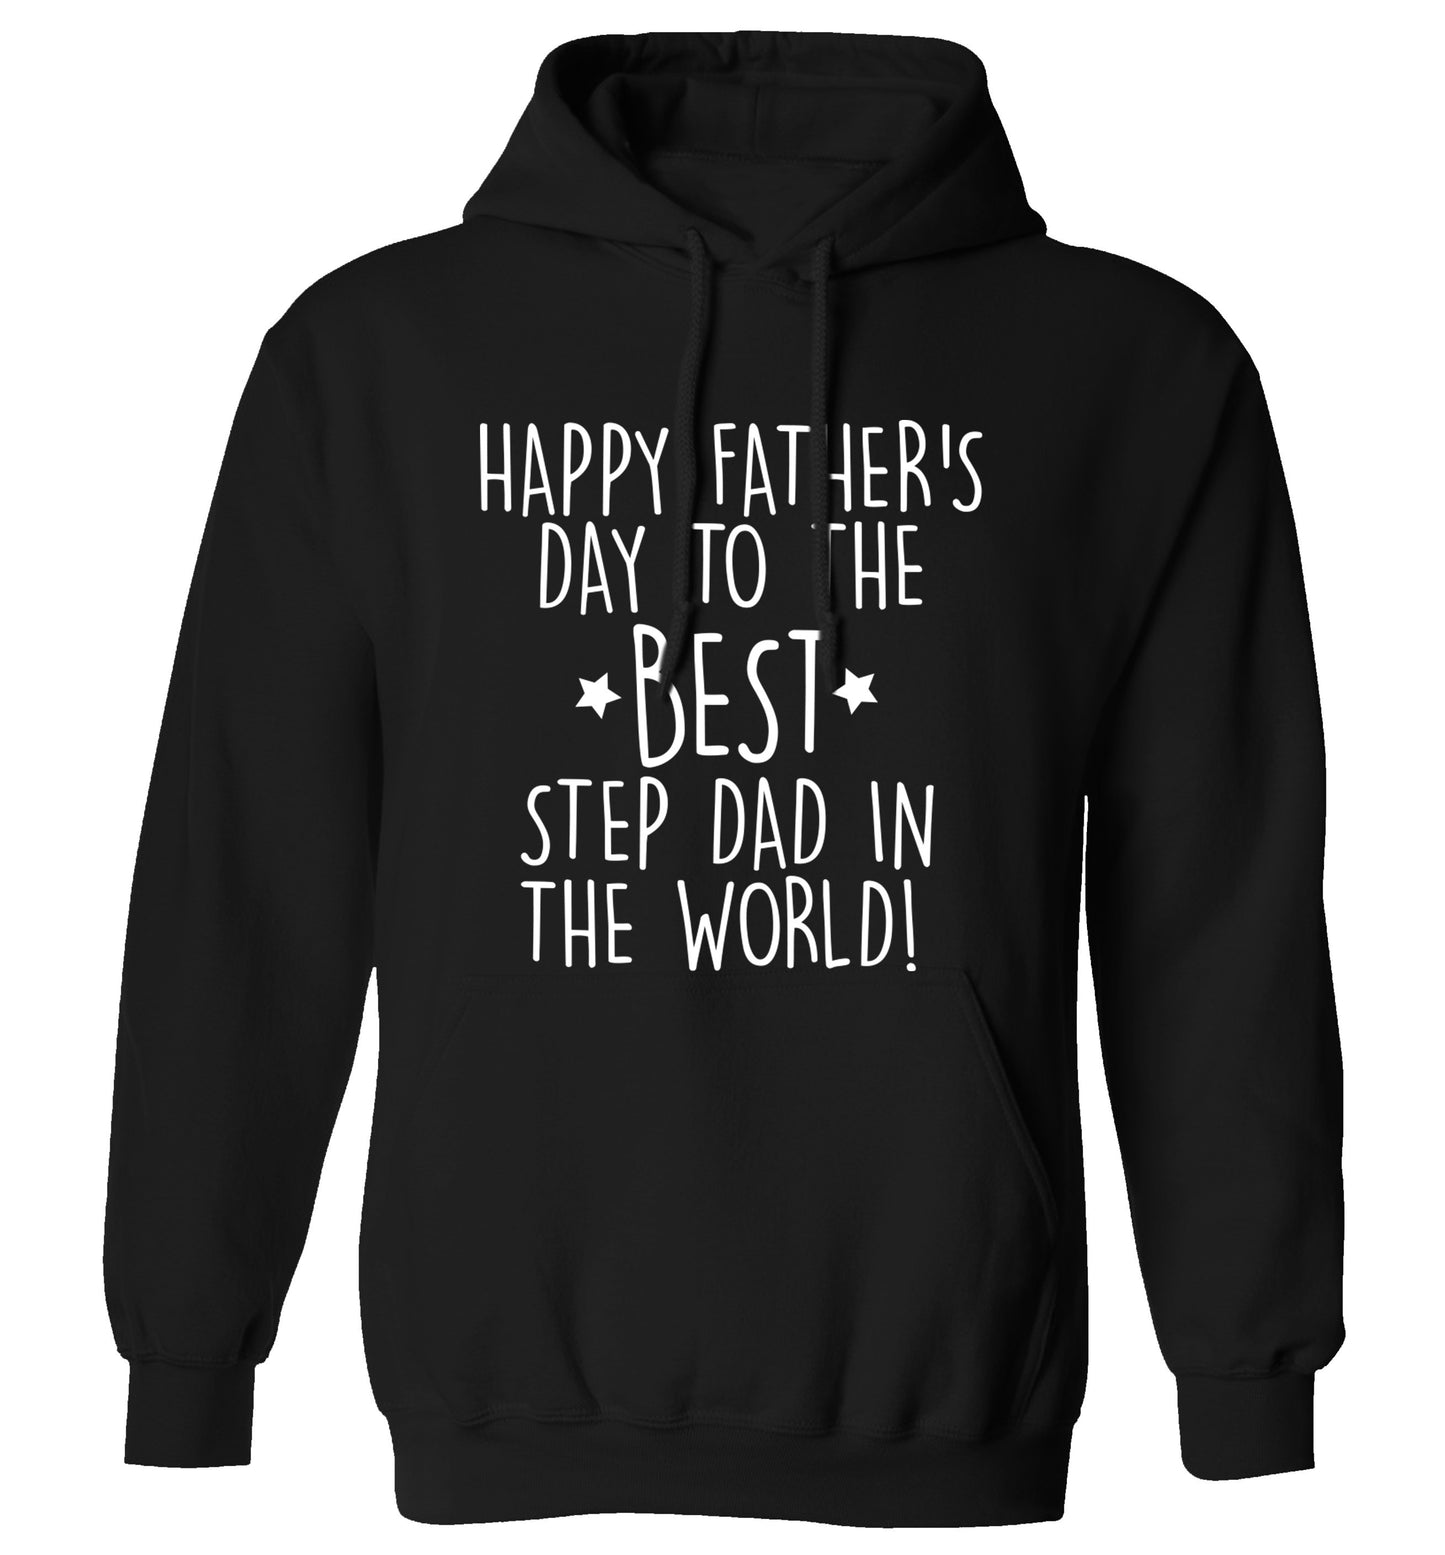 Happy Father's day to the best step dad in the world! adults unisex black hoodie 2XL